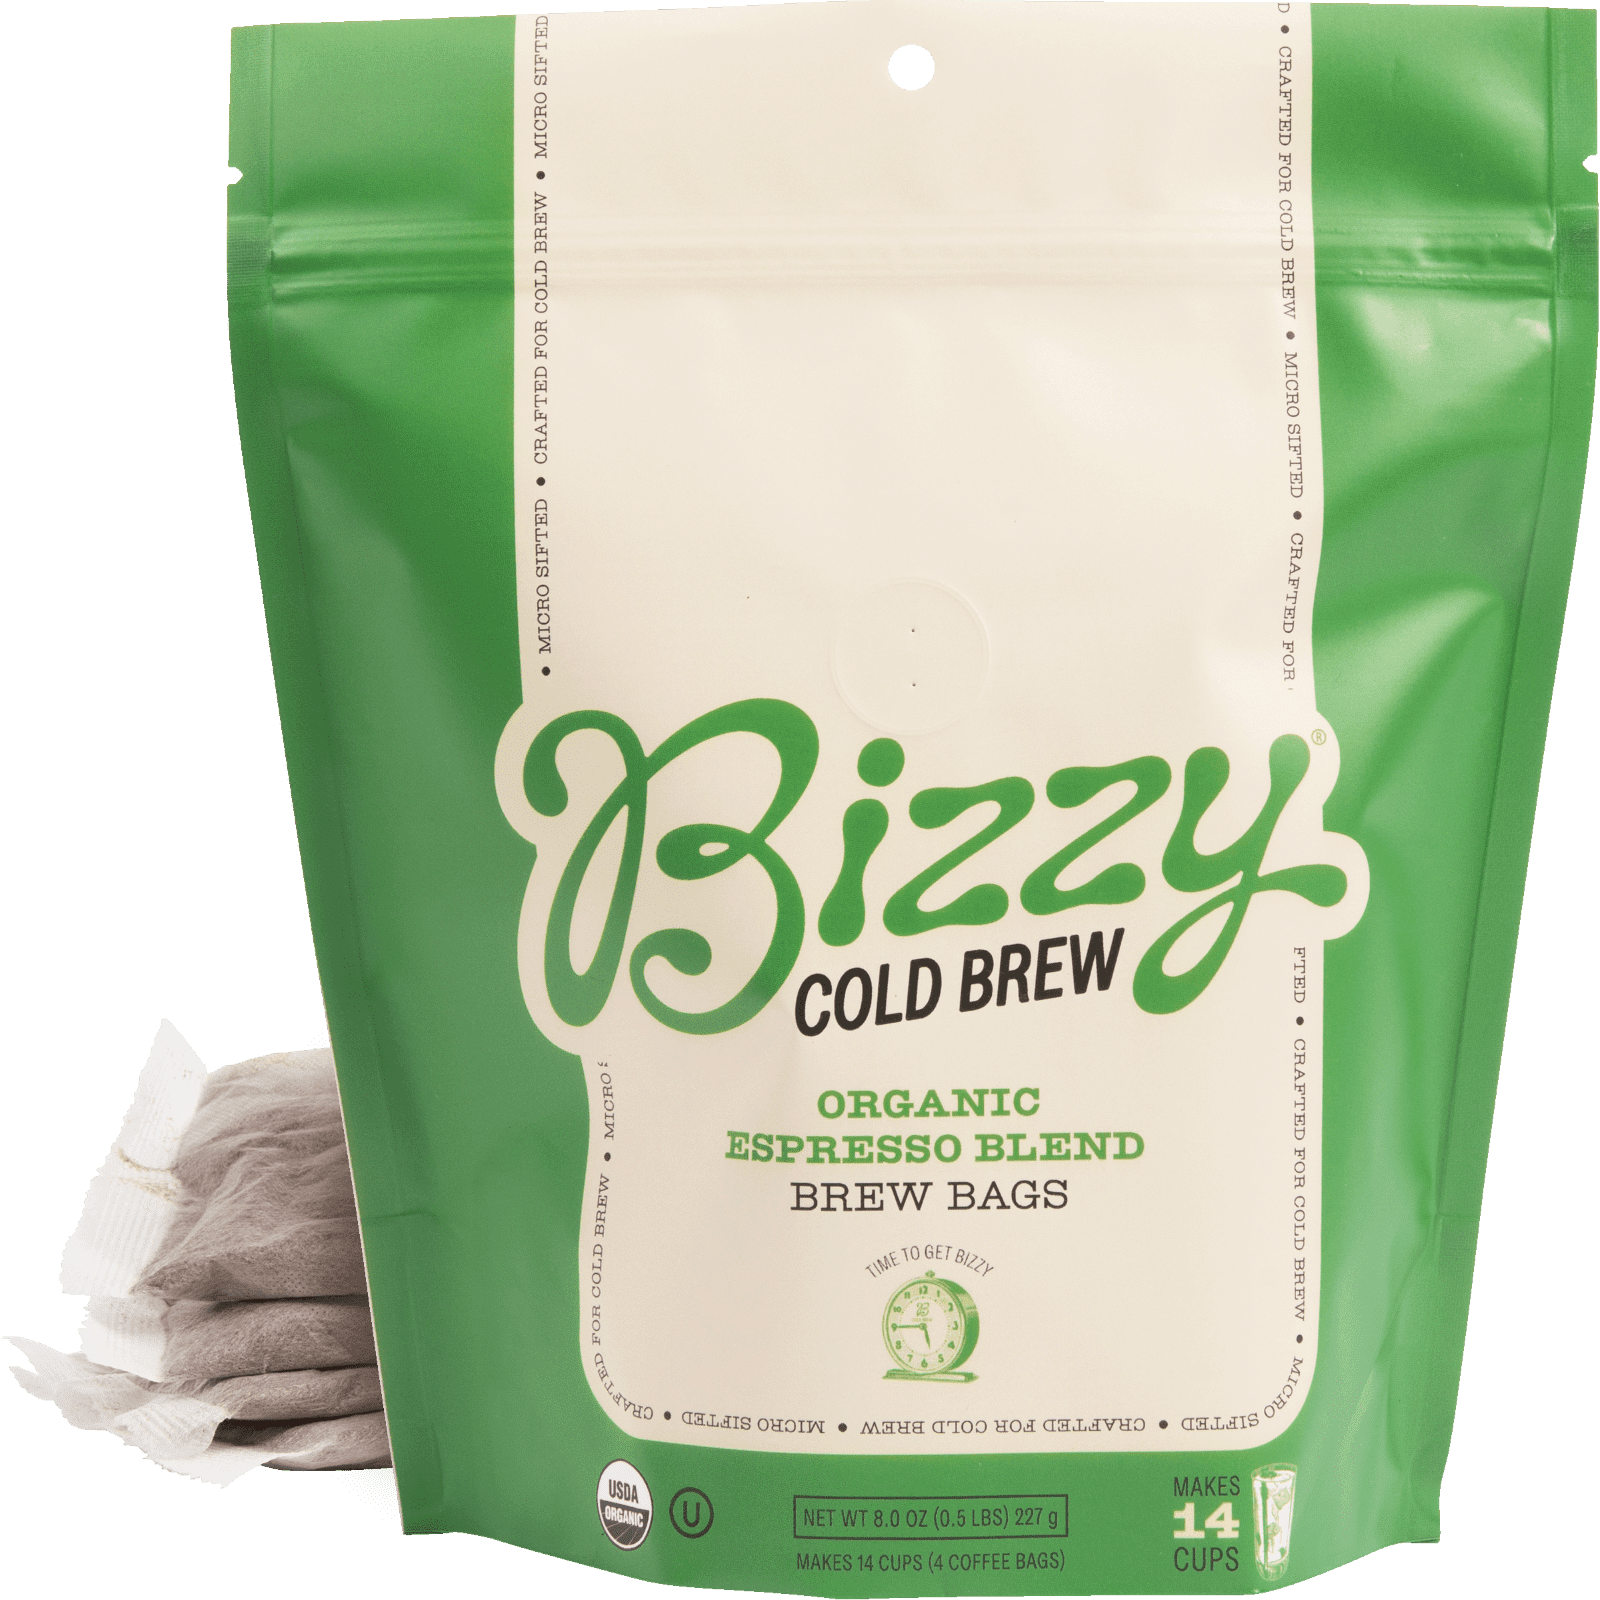 Cold Press Blend — Beans Coffee Company